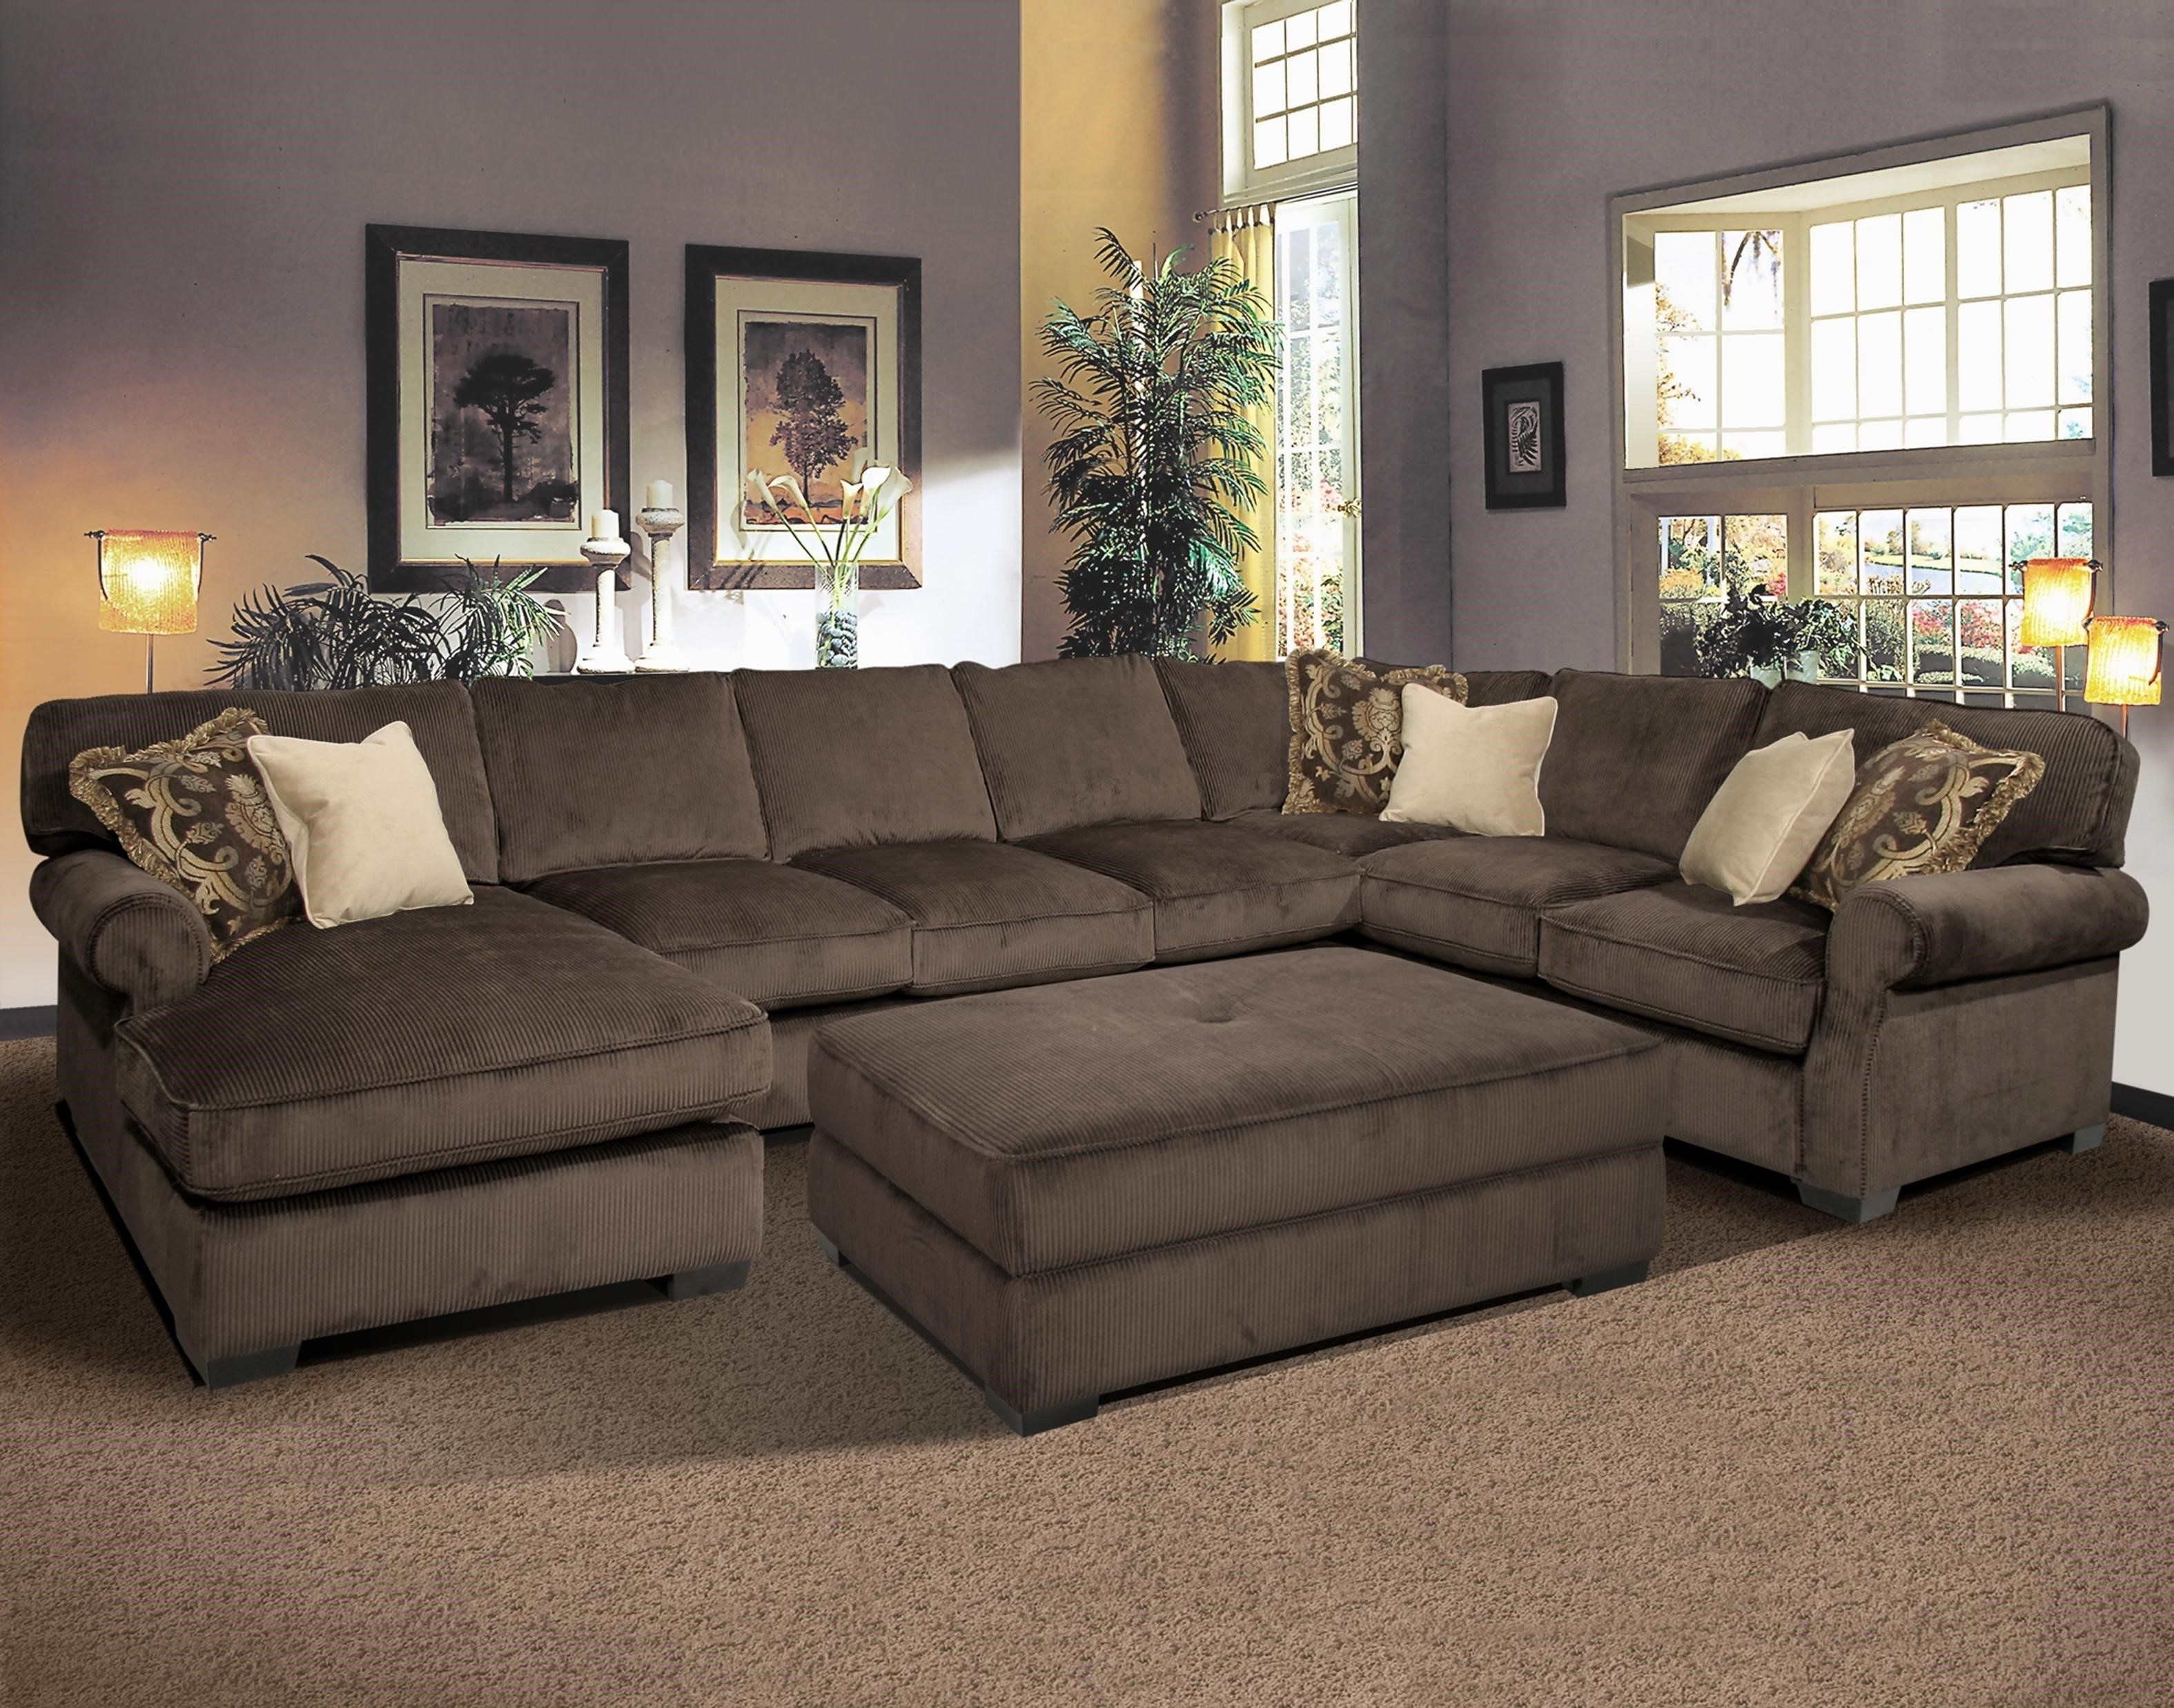 Sectional Sofa : Modern Sectional Sofa With Chaise Reclining Regarding Couches With Large Ottoman (View 2 of 15)